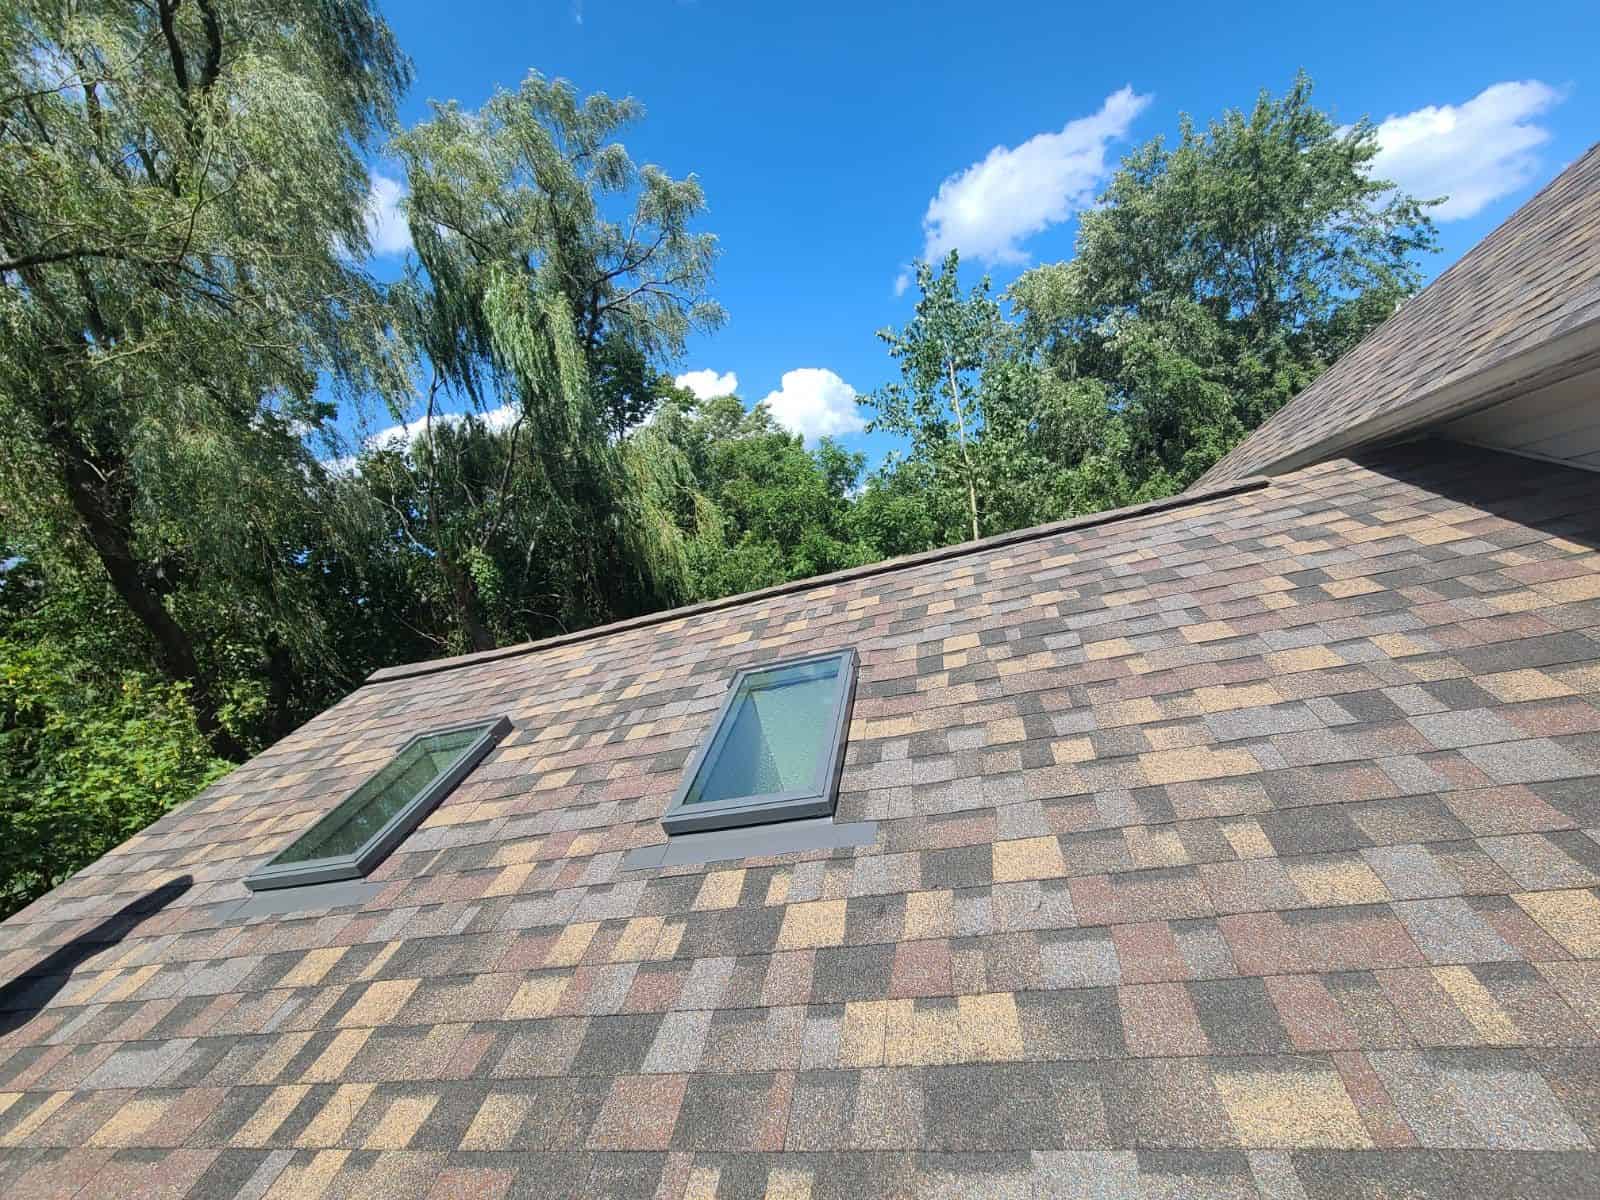 LA Roofing Skylight Contractor and Sun Tunnel Contractor